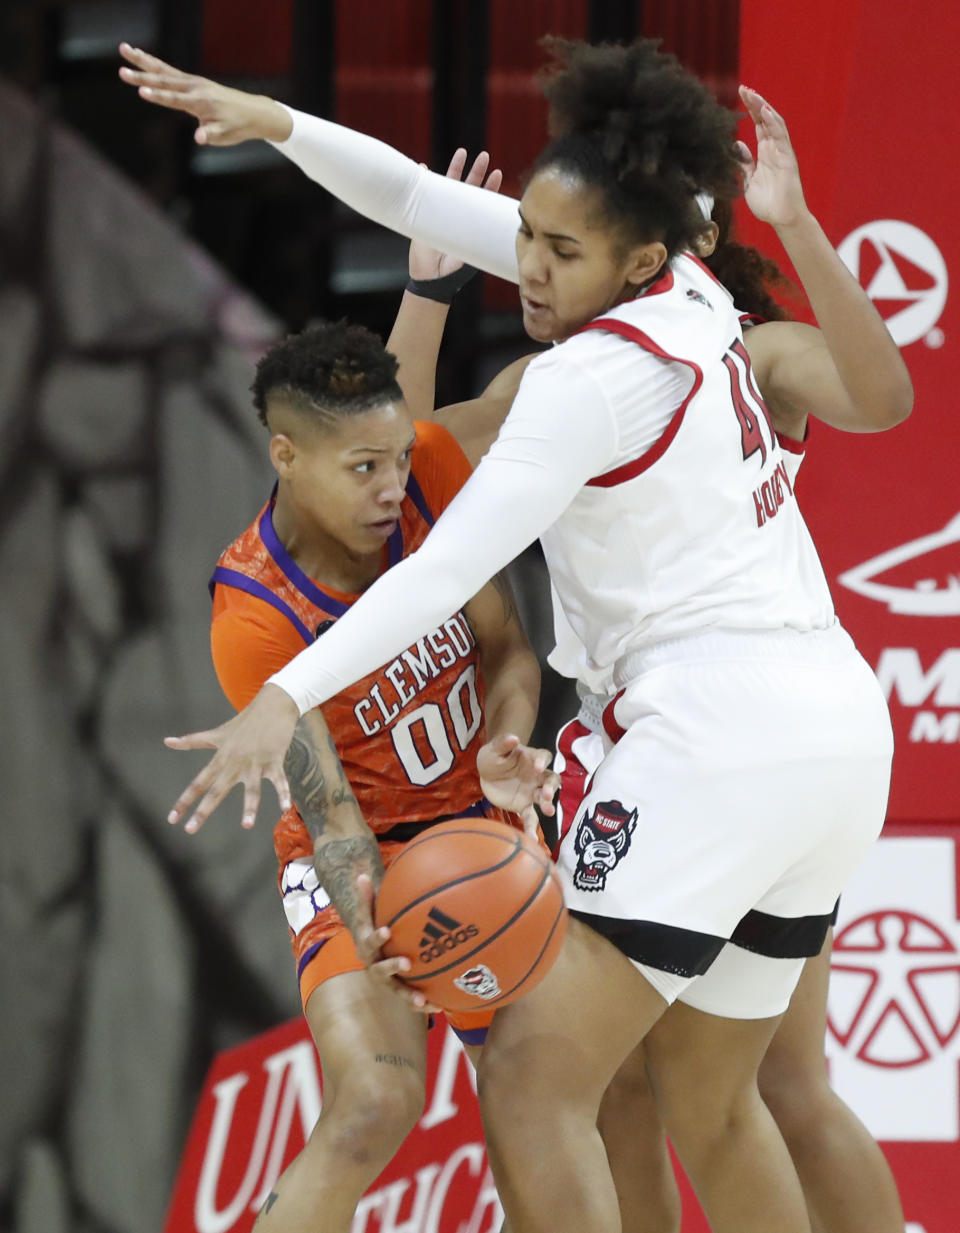 Clemson's Delicia Washington (00) passes around the pressure by North Carolina State's Camille Hobby (41) during the first half of an NCAA college basketball game at Reynolds Coliseum in Raleigh, N.C., Thursday, Feb. 11, 2021. (Ethan Hyman/The News & Observer via AP)